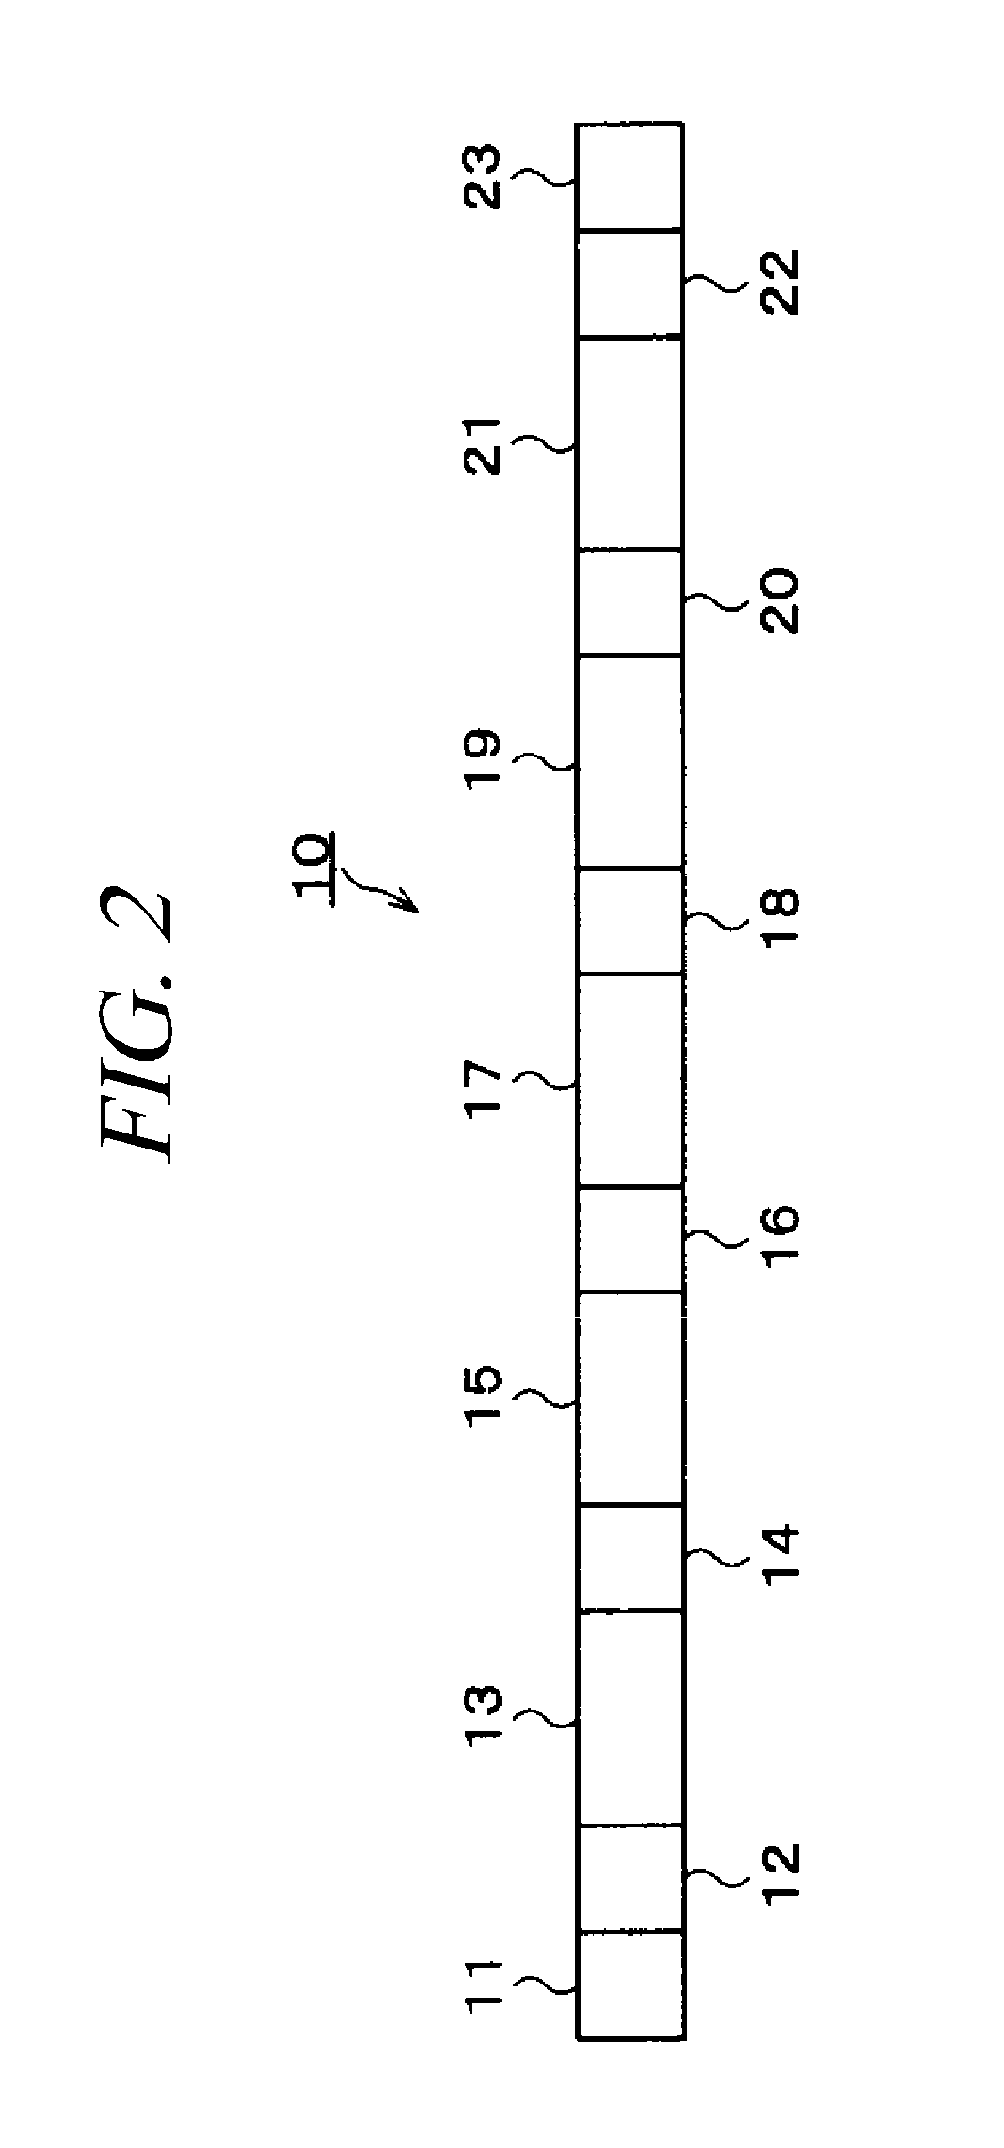 Evaporating apparatus and method for operating the same